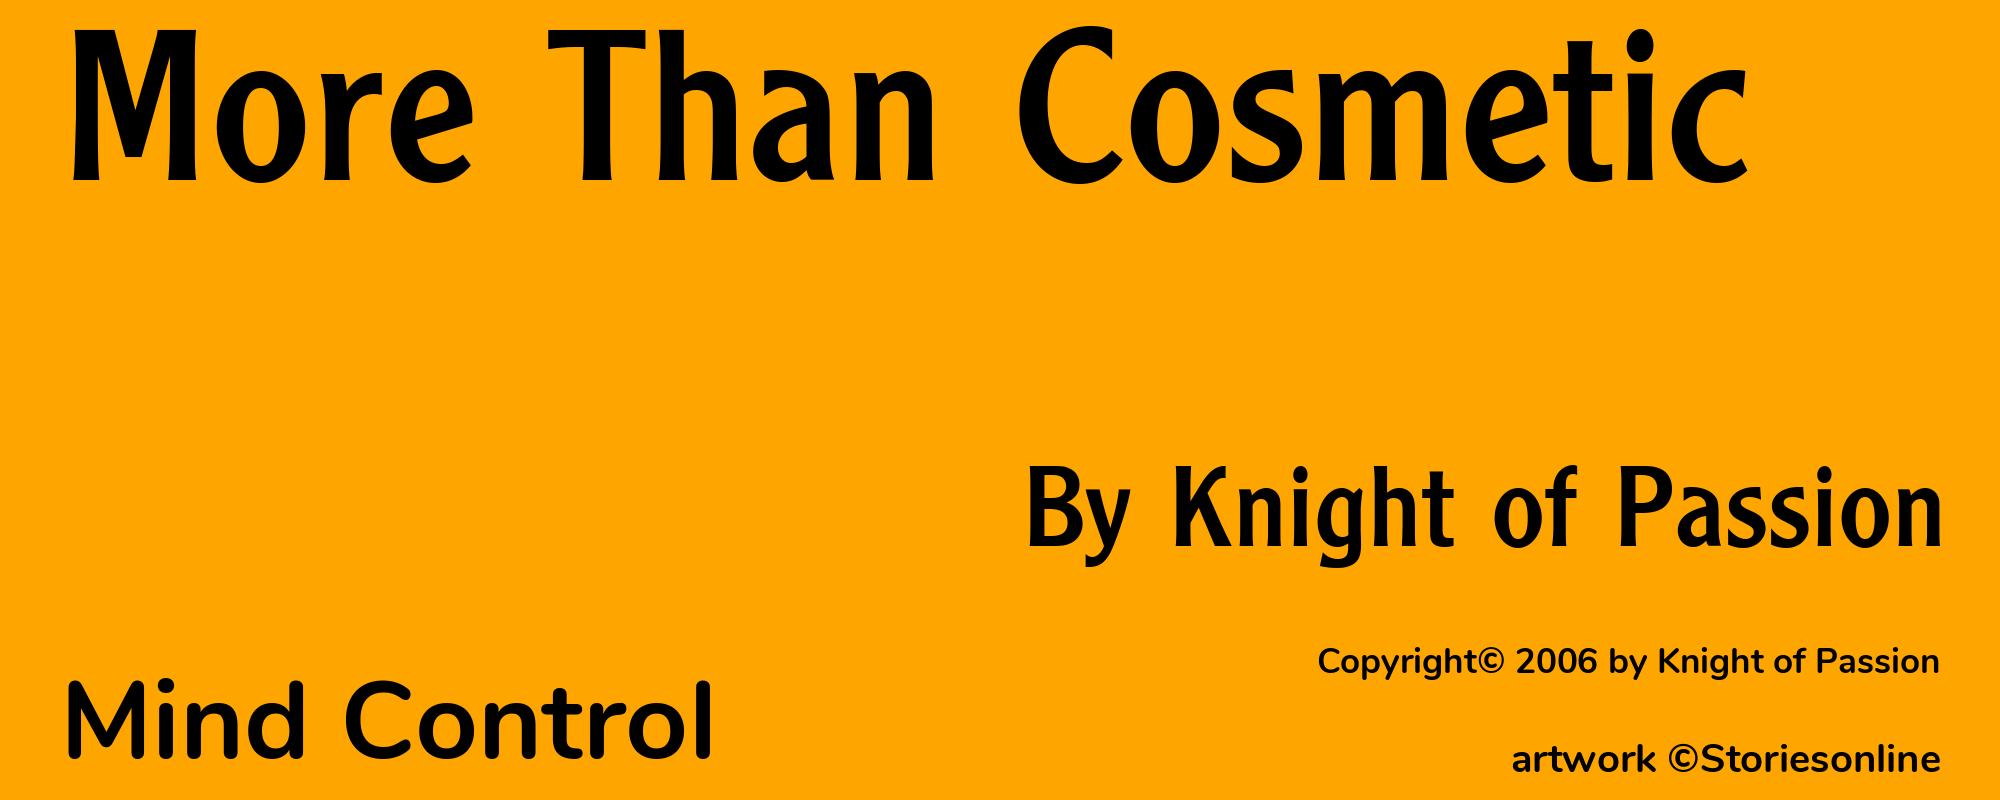 More Than Cosmetic - Cover